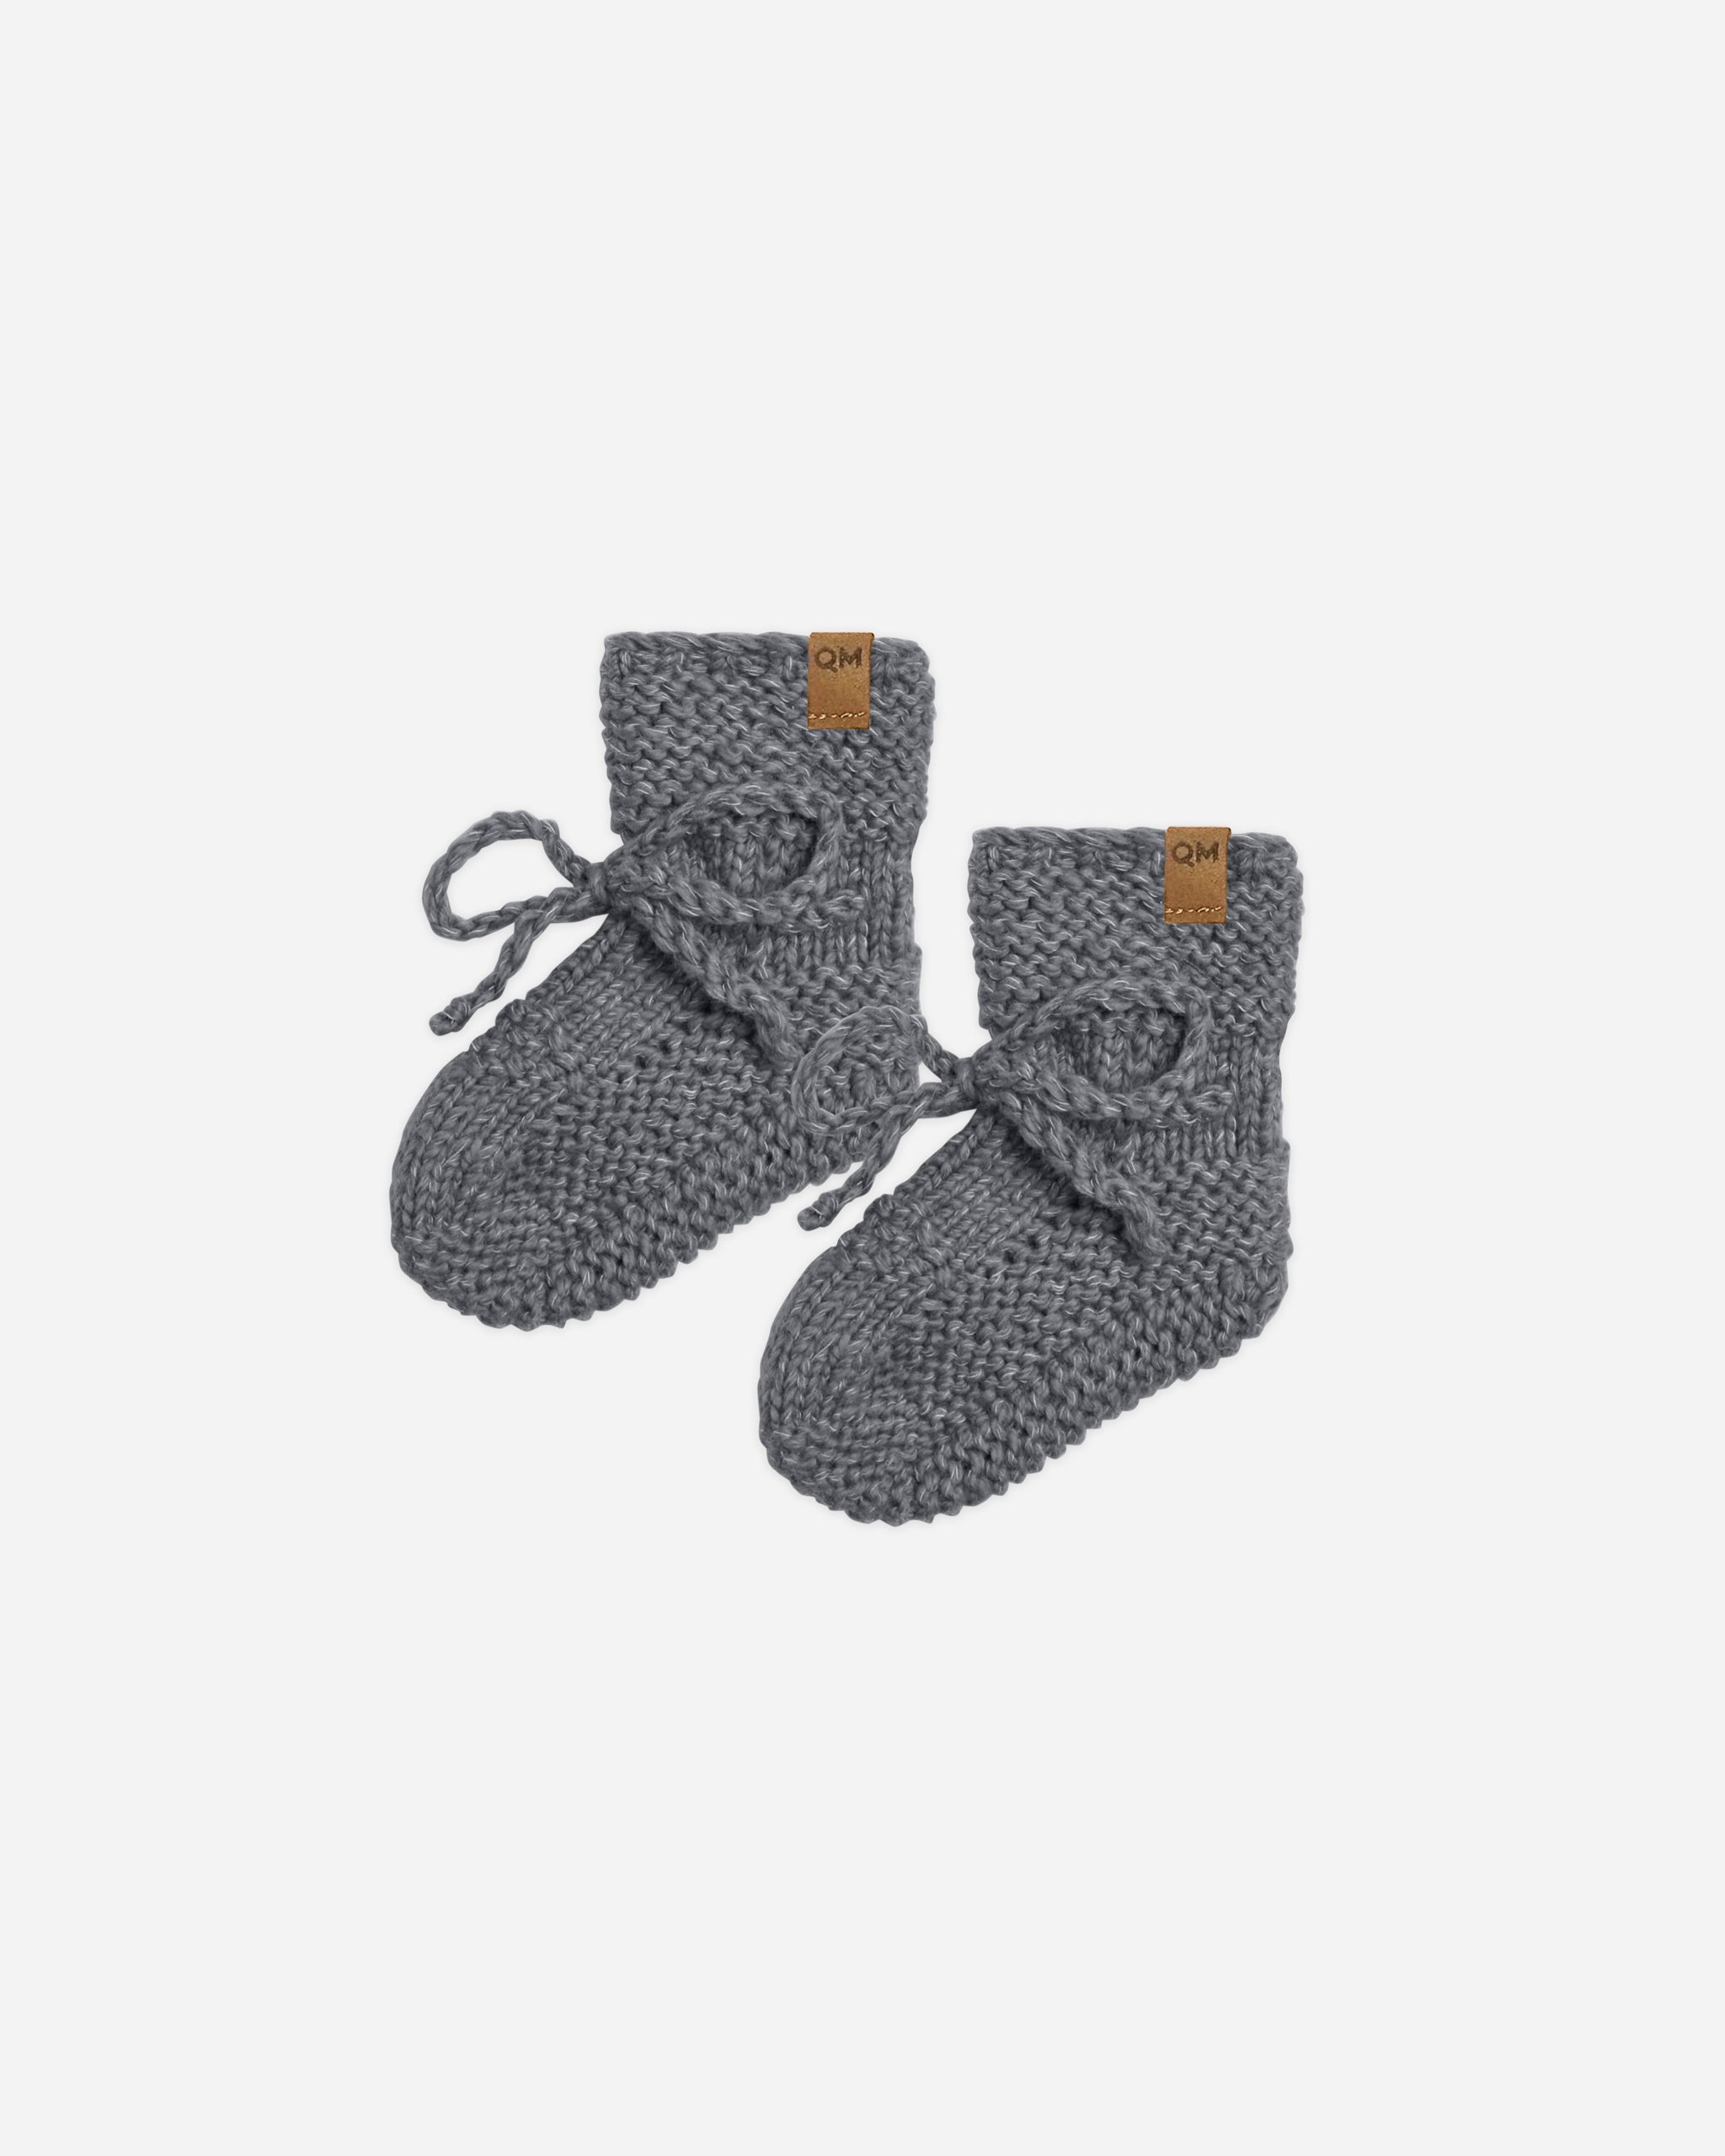 Knit Booties || Navy Heathered - Rylee + Cru | Kids Clothes | Trendy Baby Clothes | Modern Infant Outfits |